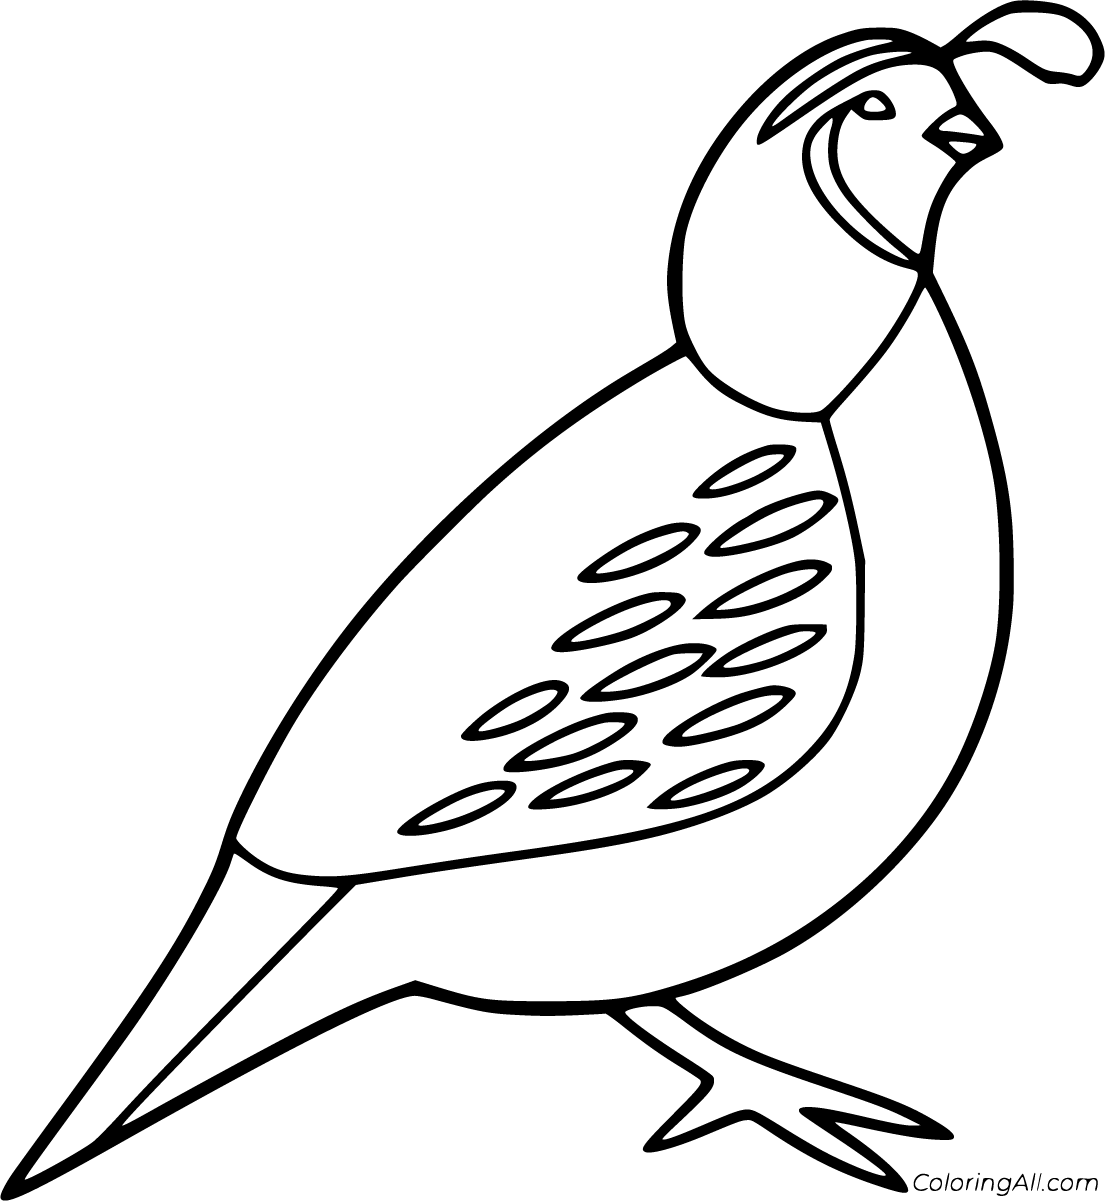 Quail Coloring Pages   ColoringAll